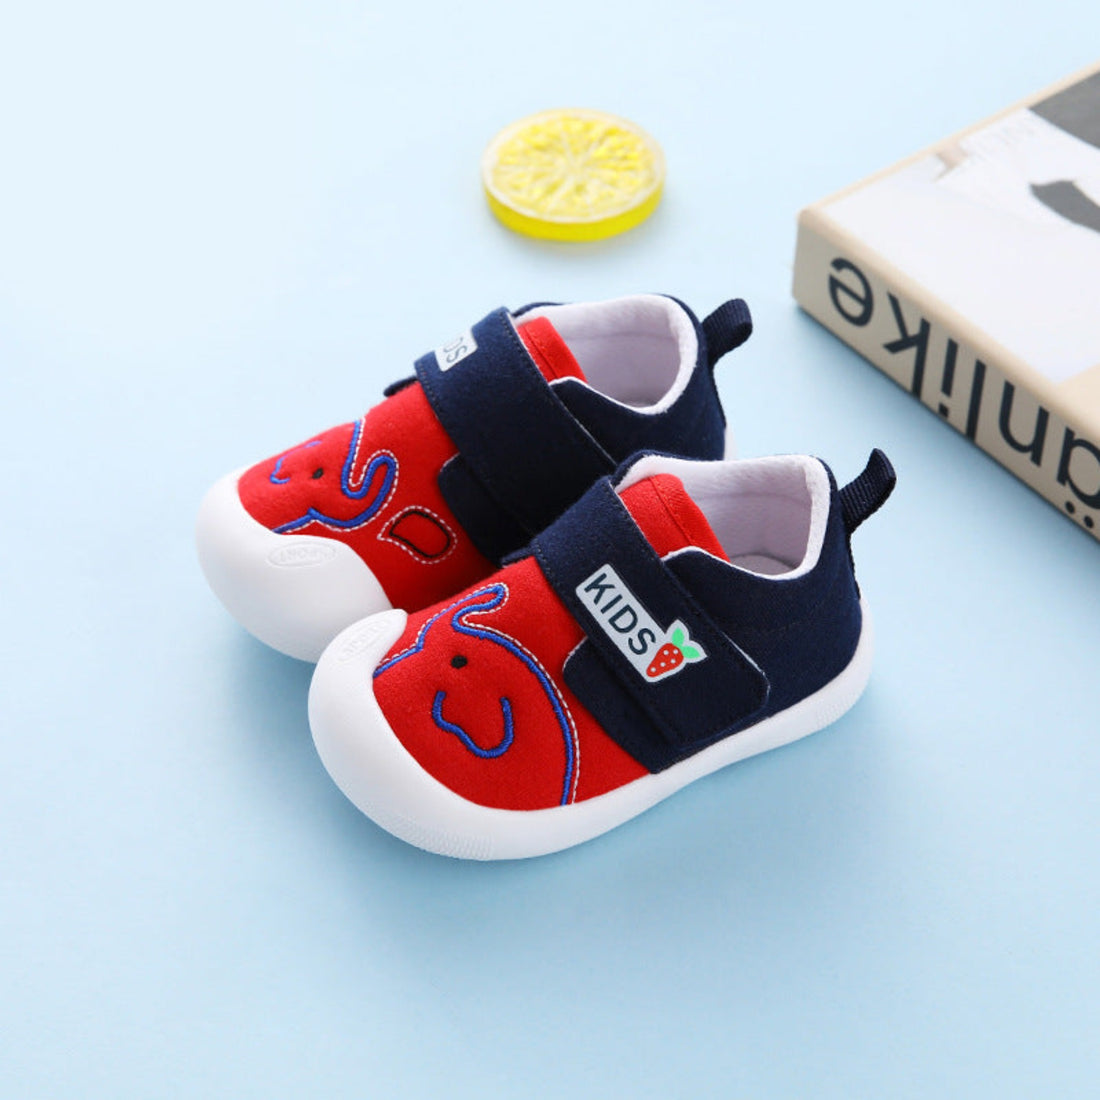 Soft sole baby shoes in red